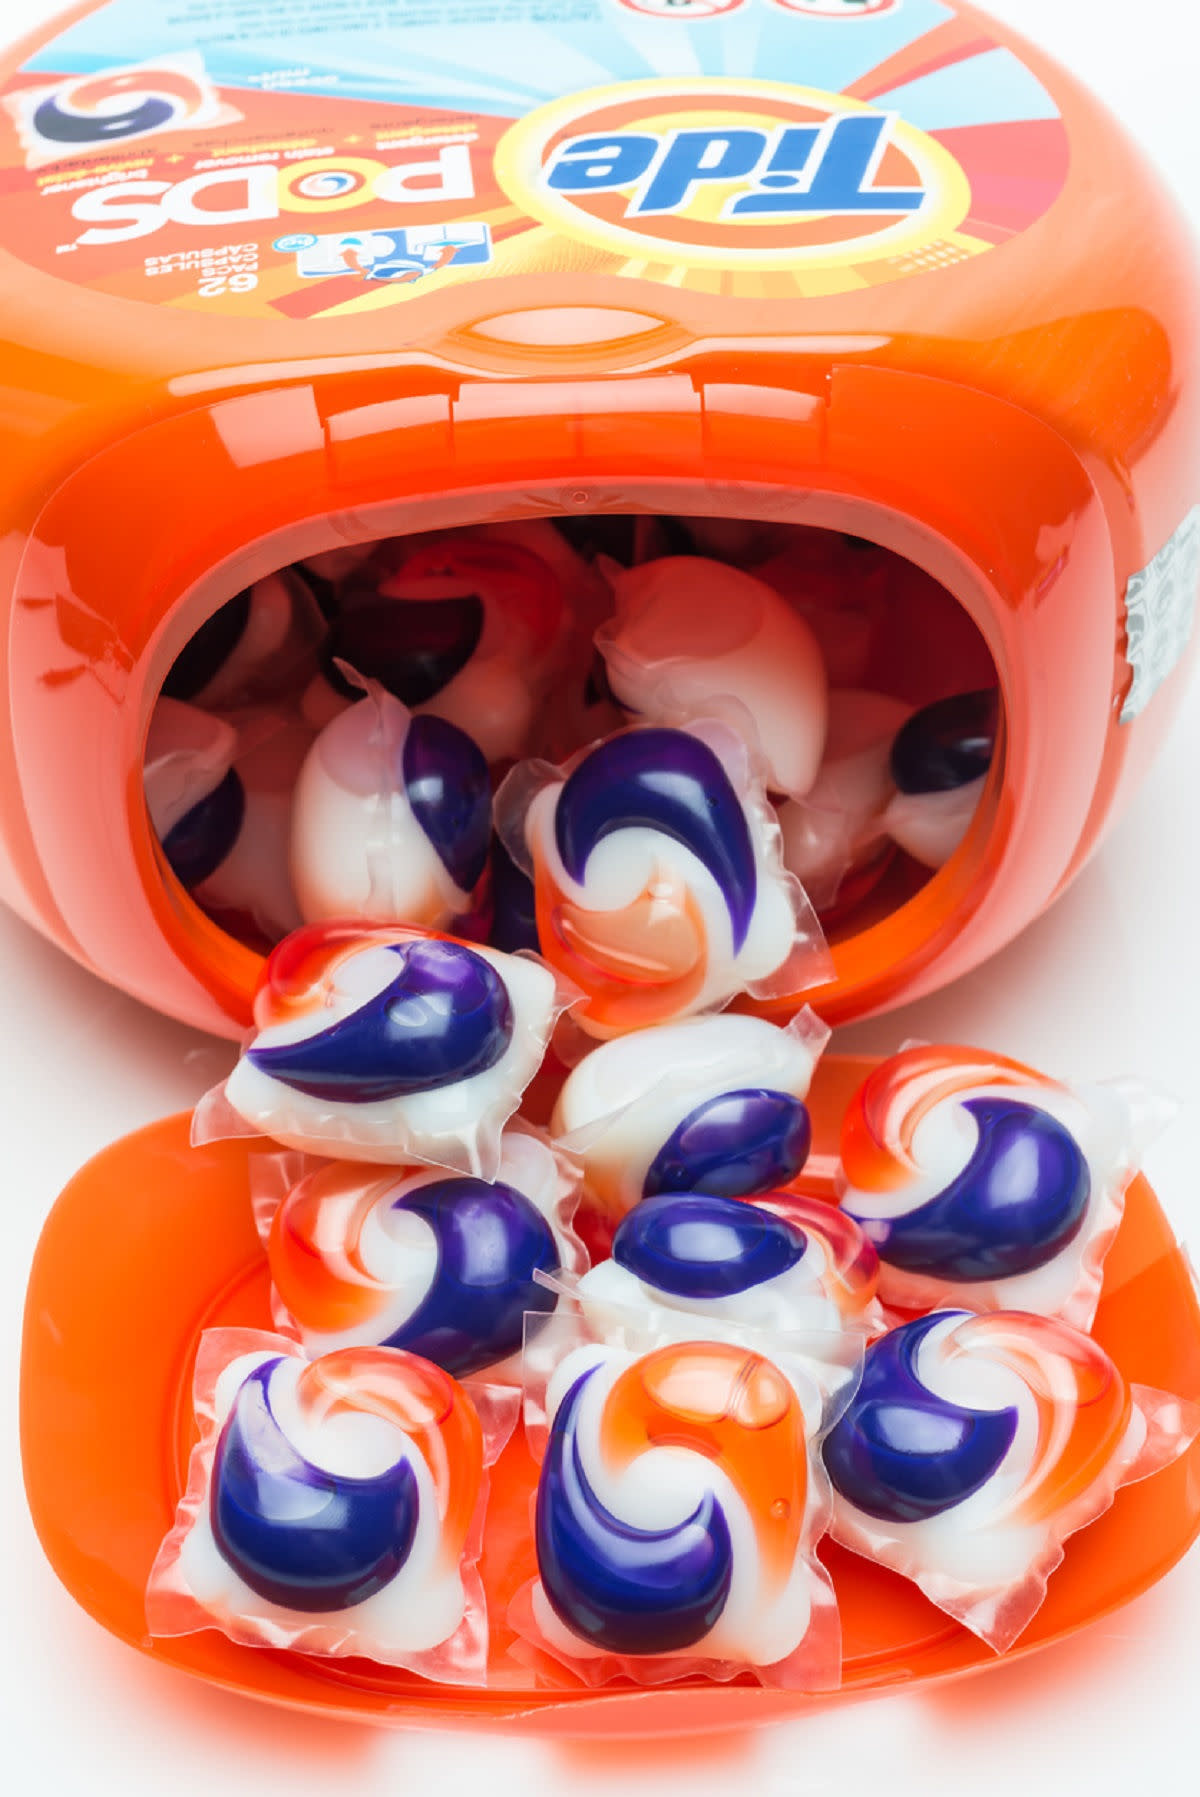 Detergent pods are dangerous — and expensive - MarketWatch